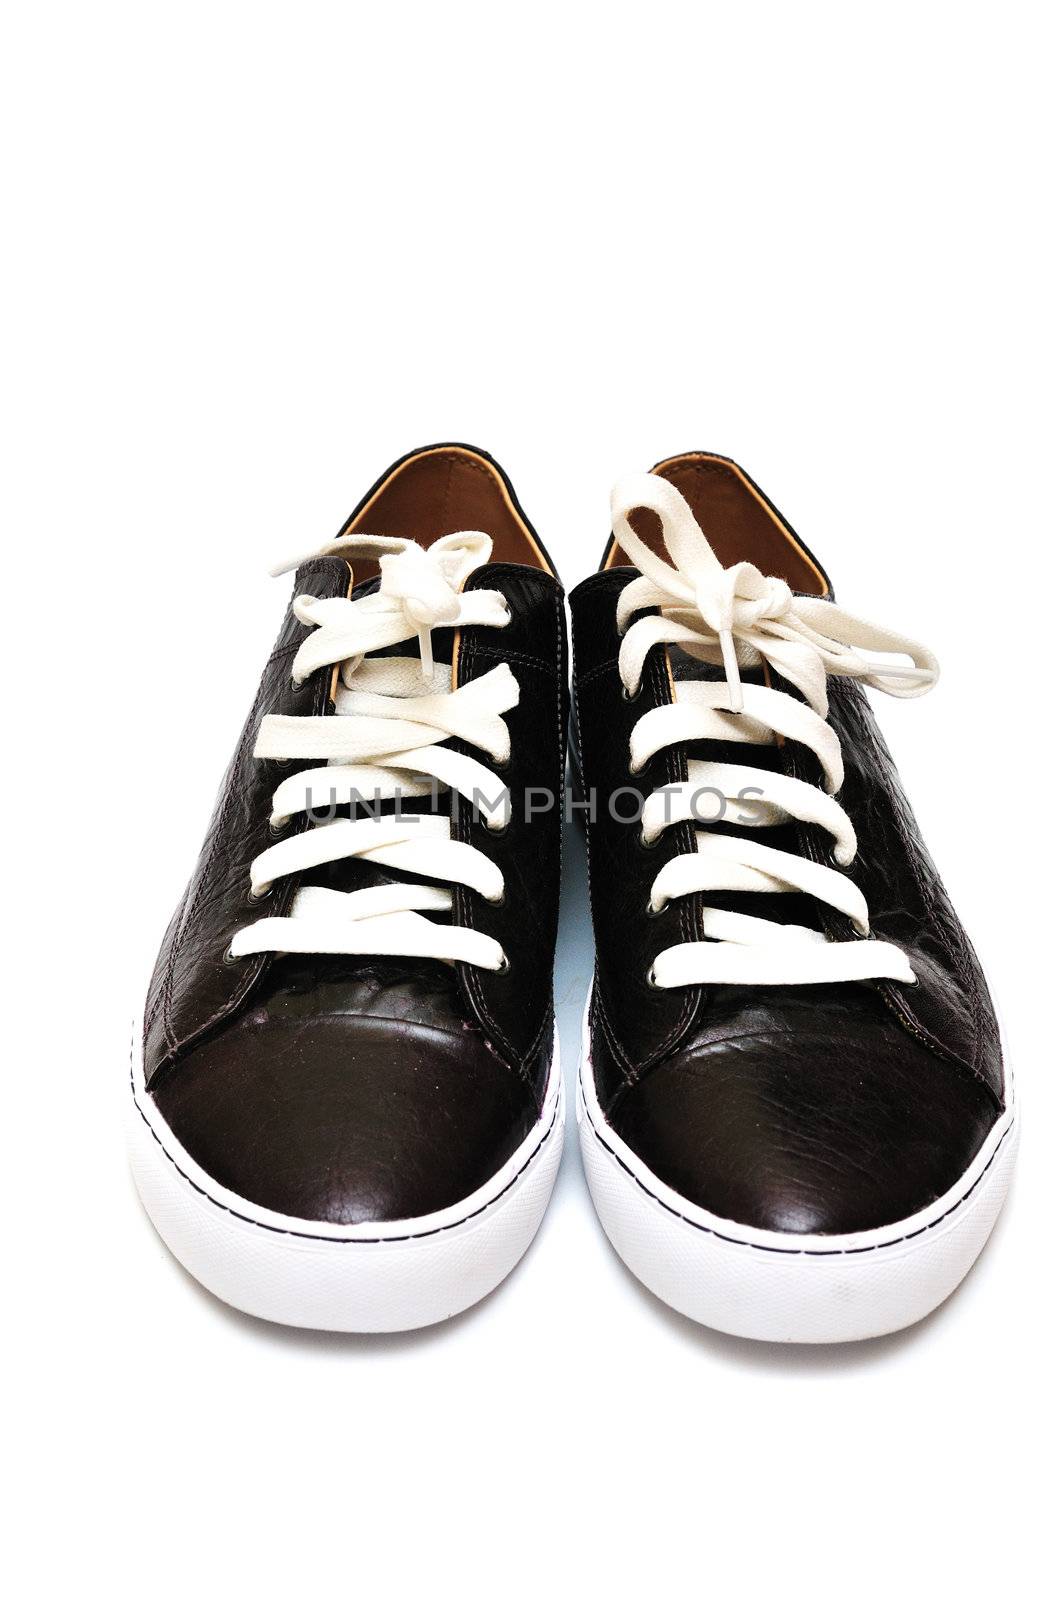 Sport leather man's shoes over the white
